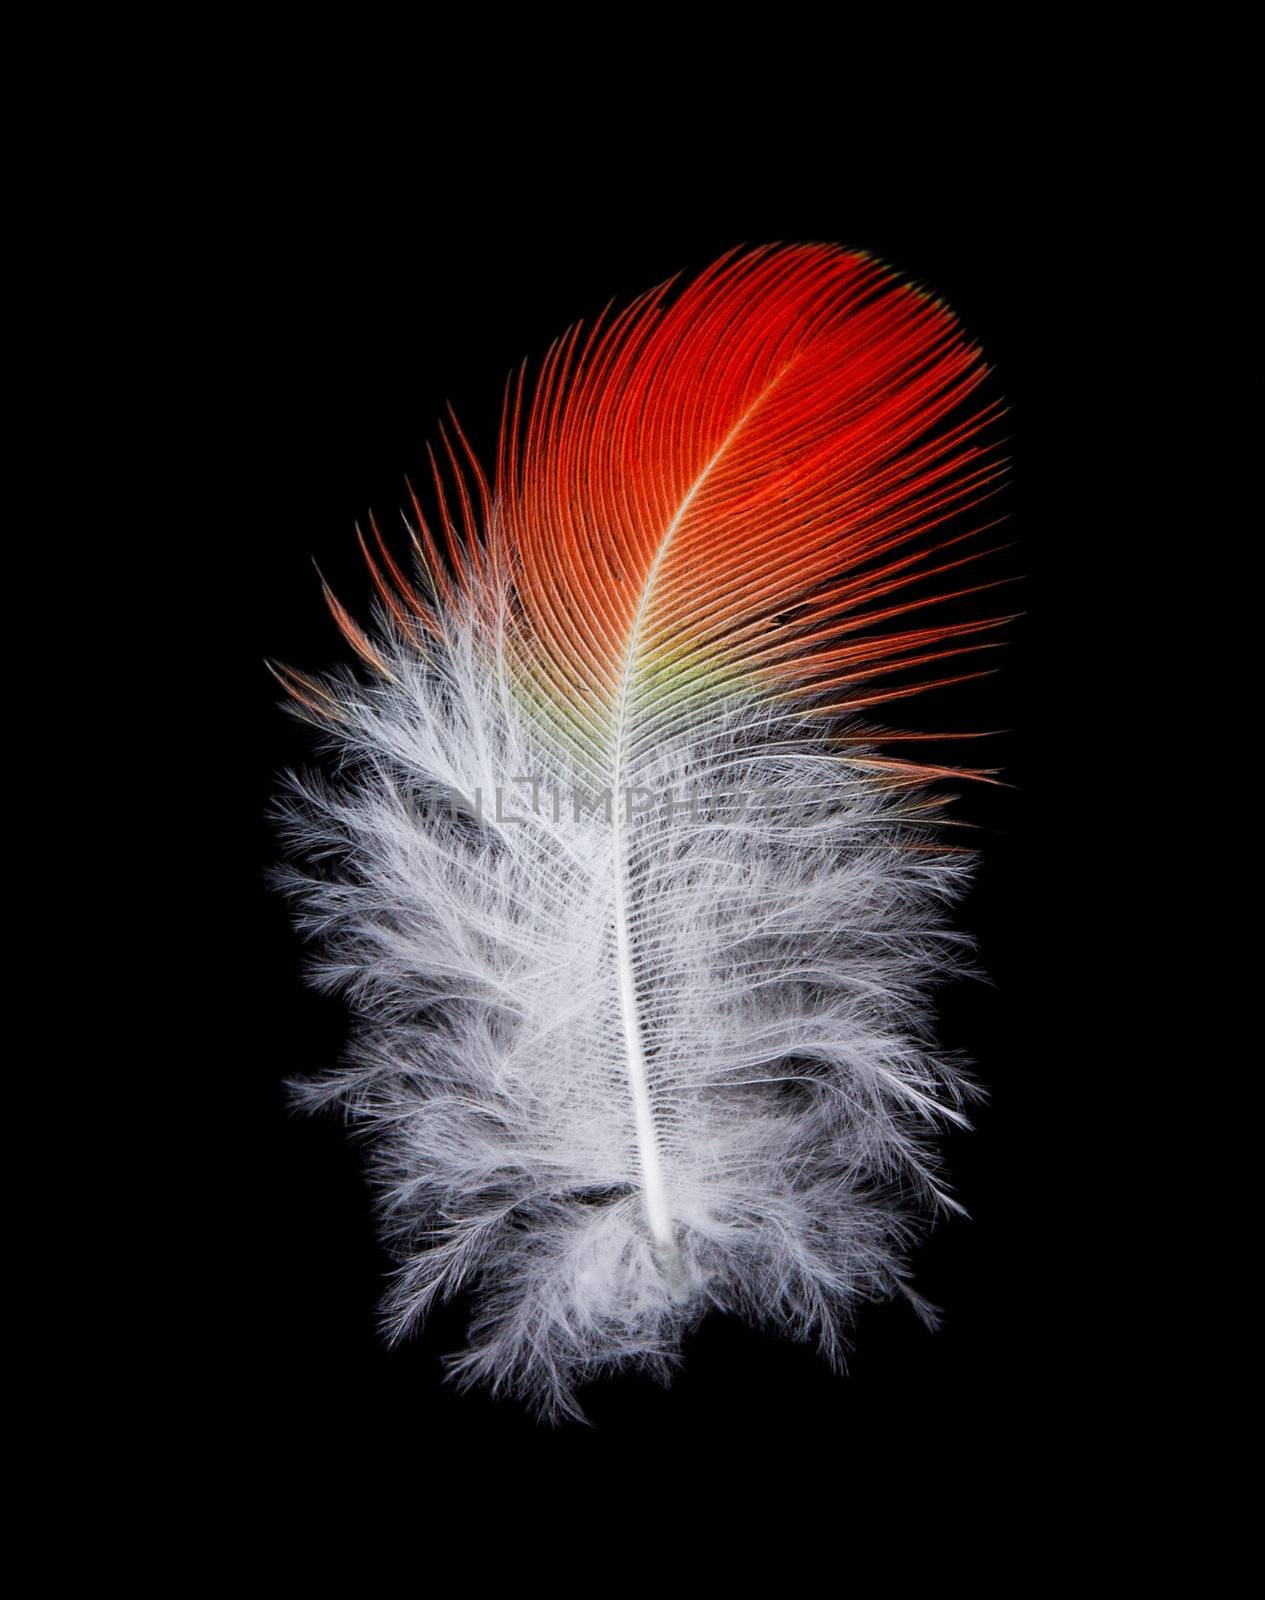 feather on black background by Alekcey